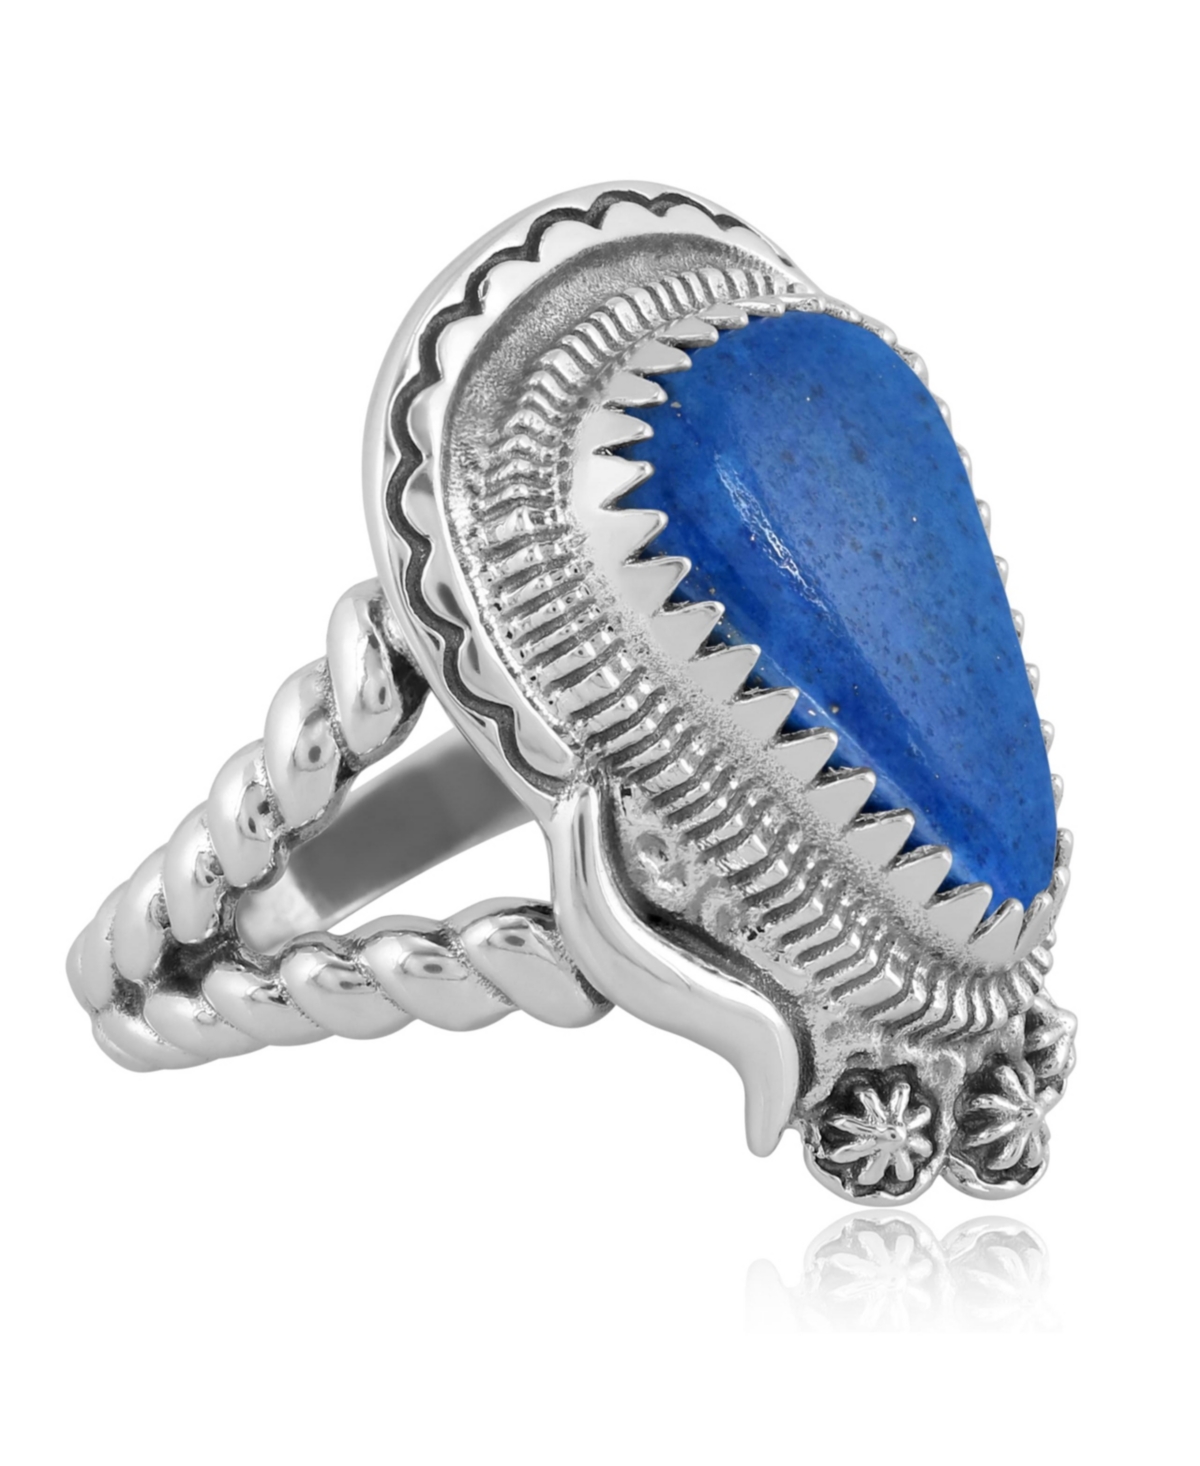 Southwestern Rope Ring with Sterling Silver Band and Genuine Gemstone, Size 6-11 - Blue denim lapis